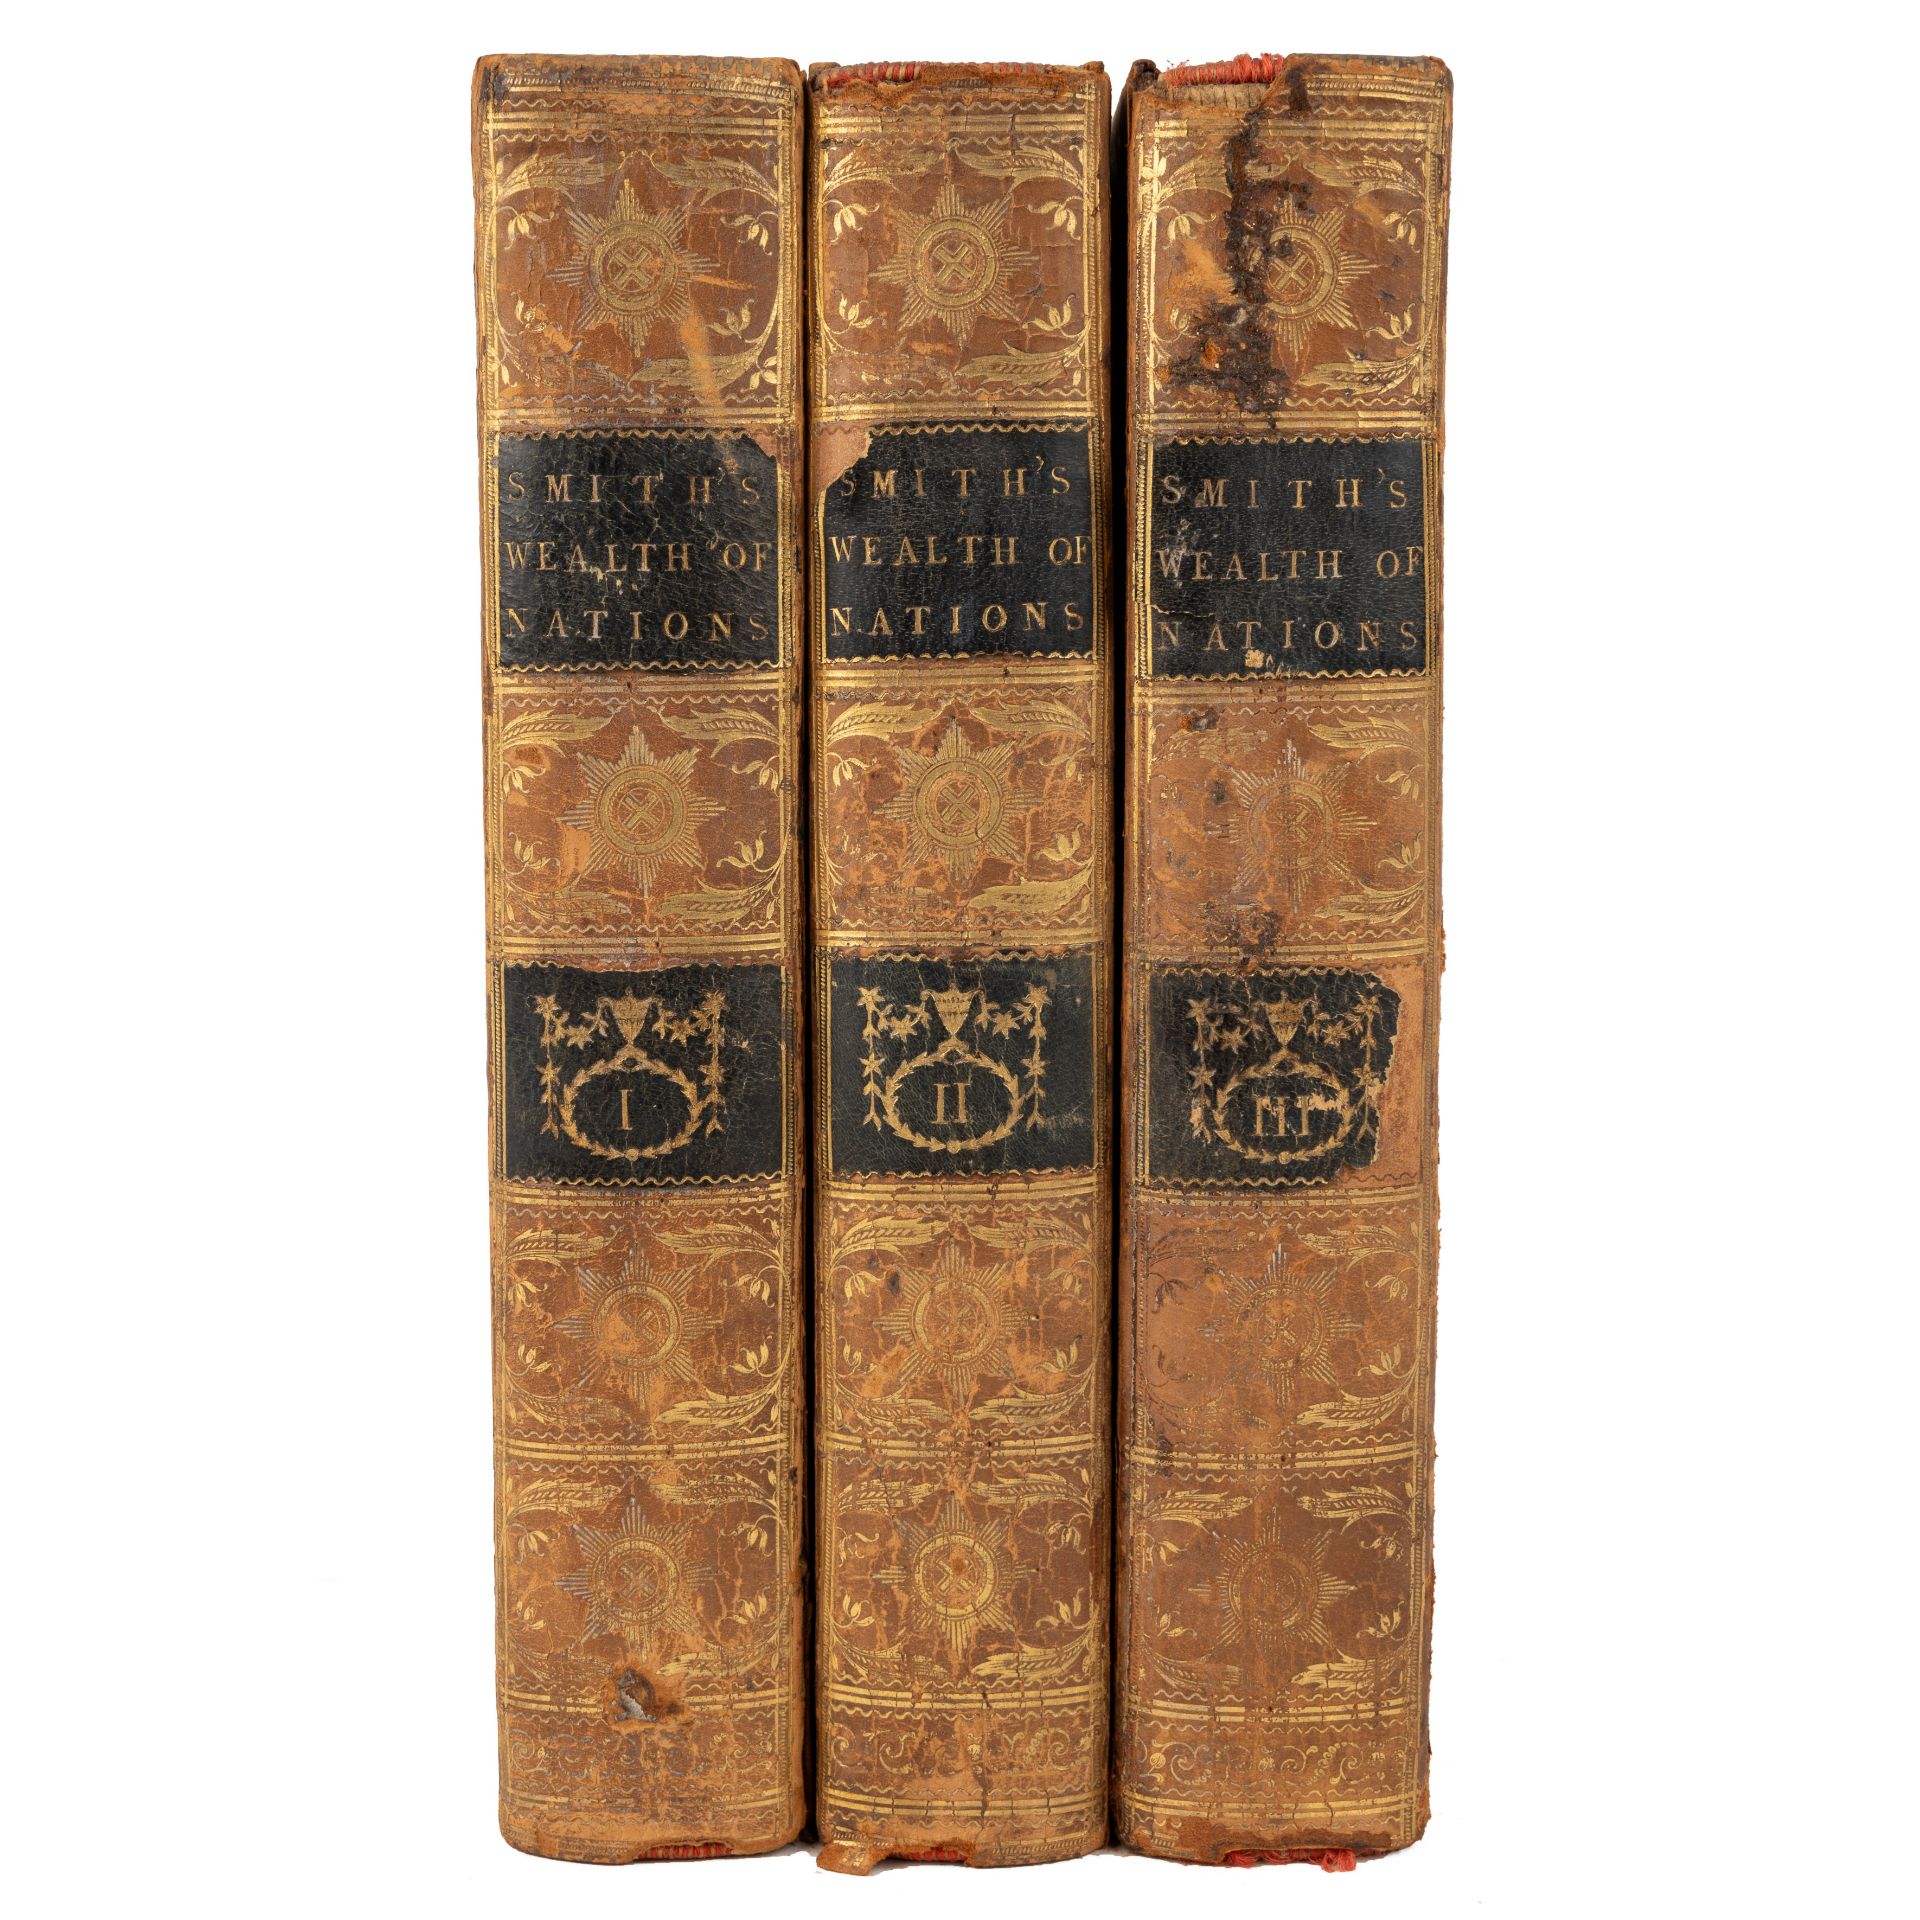 Smith (Adam) 'An Inquiry into the Nature and Causes of the Wealth of Nations' 3 vols. 6th Ed.